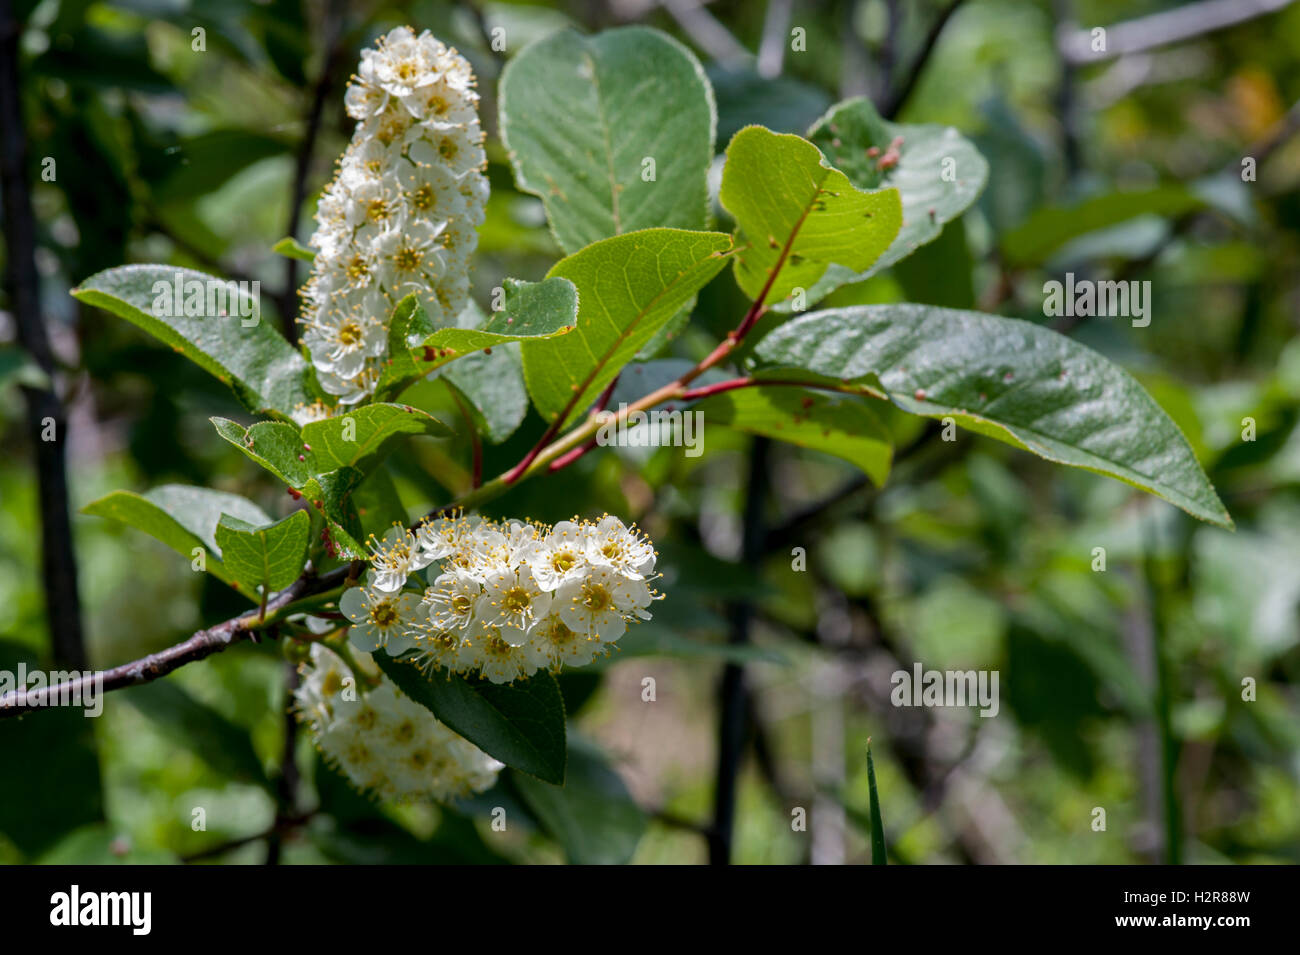 Probably a Chokeberry (Aronia melocarpa) that escaped cultivation as this species is not native to Colorado. Stock Photo